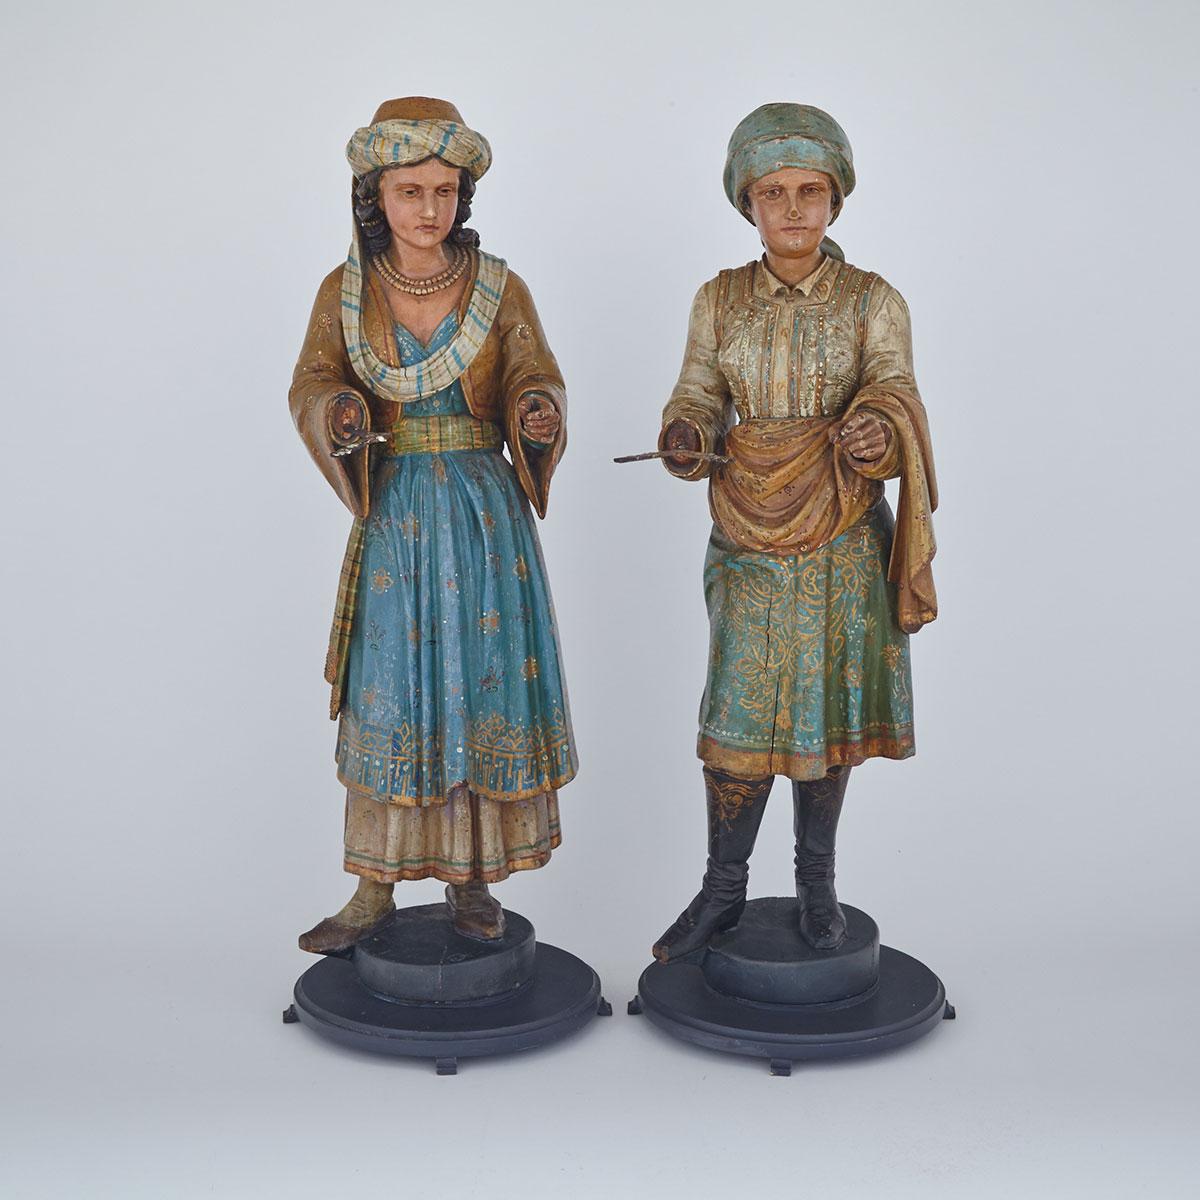 Pair of Turkish Carved and Polychromed Automaton FIgures, mid 19th century